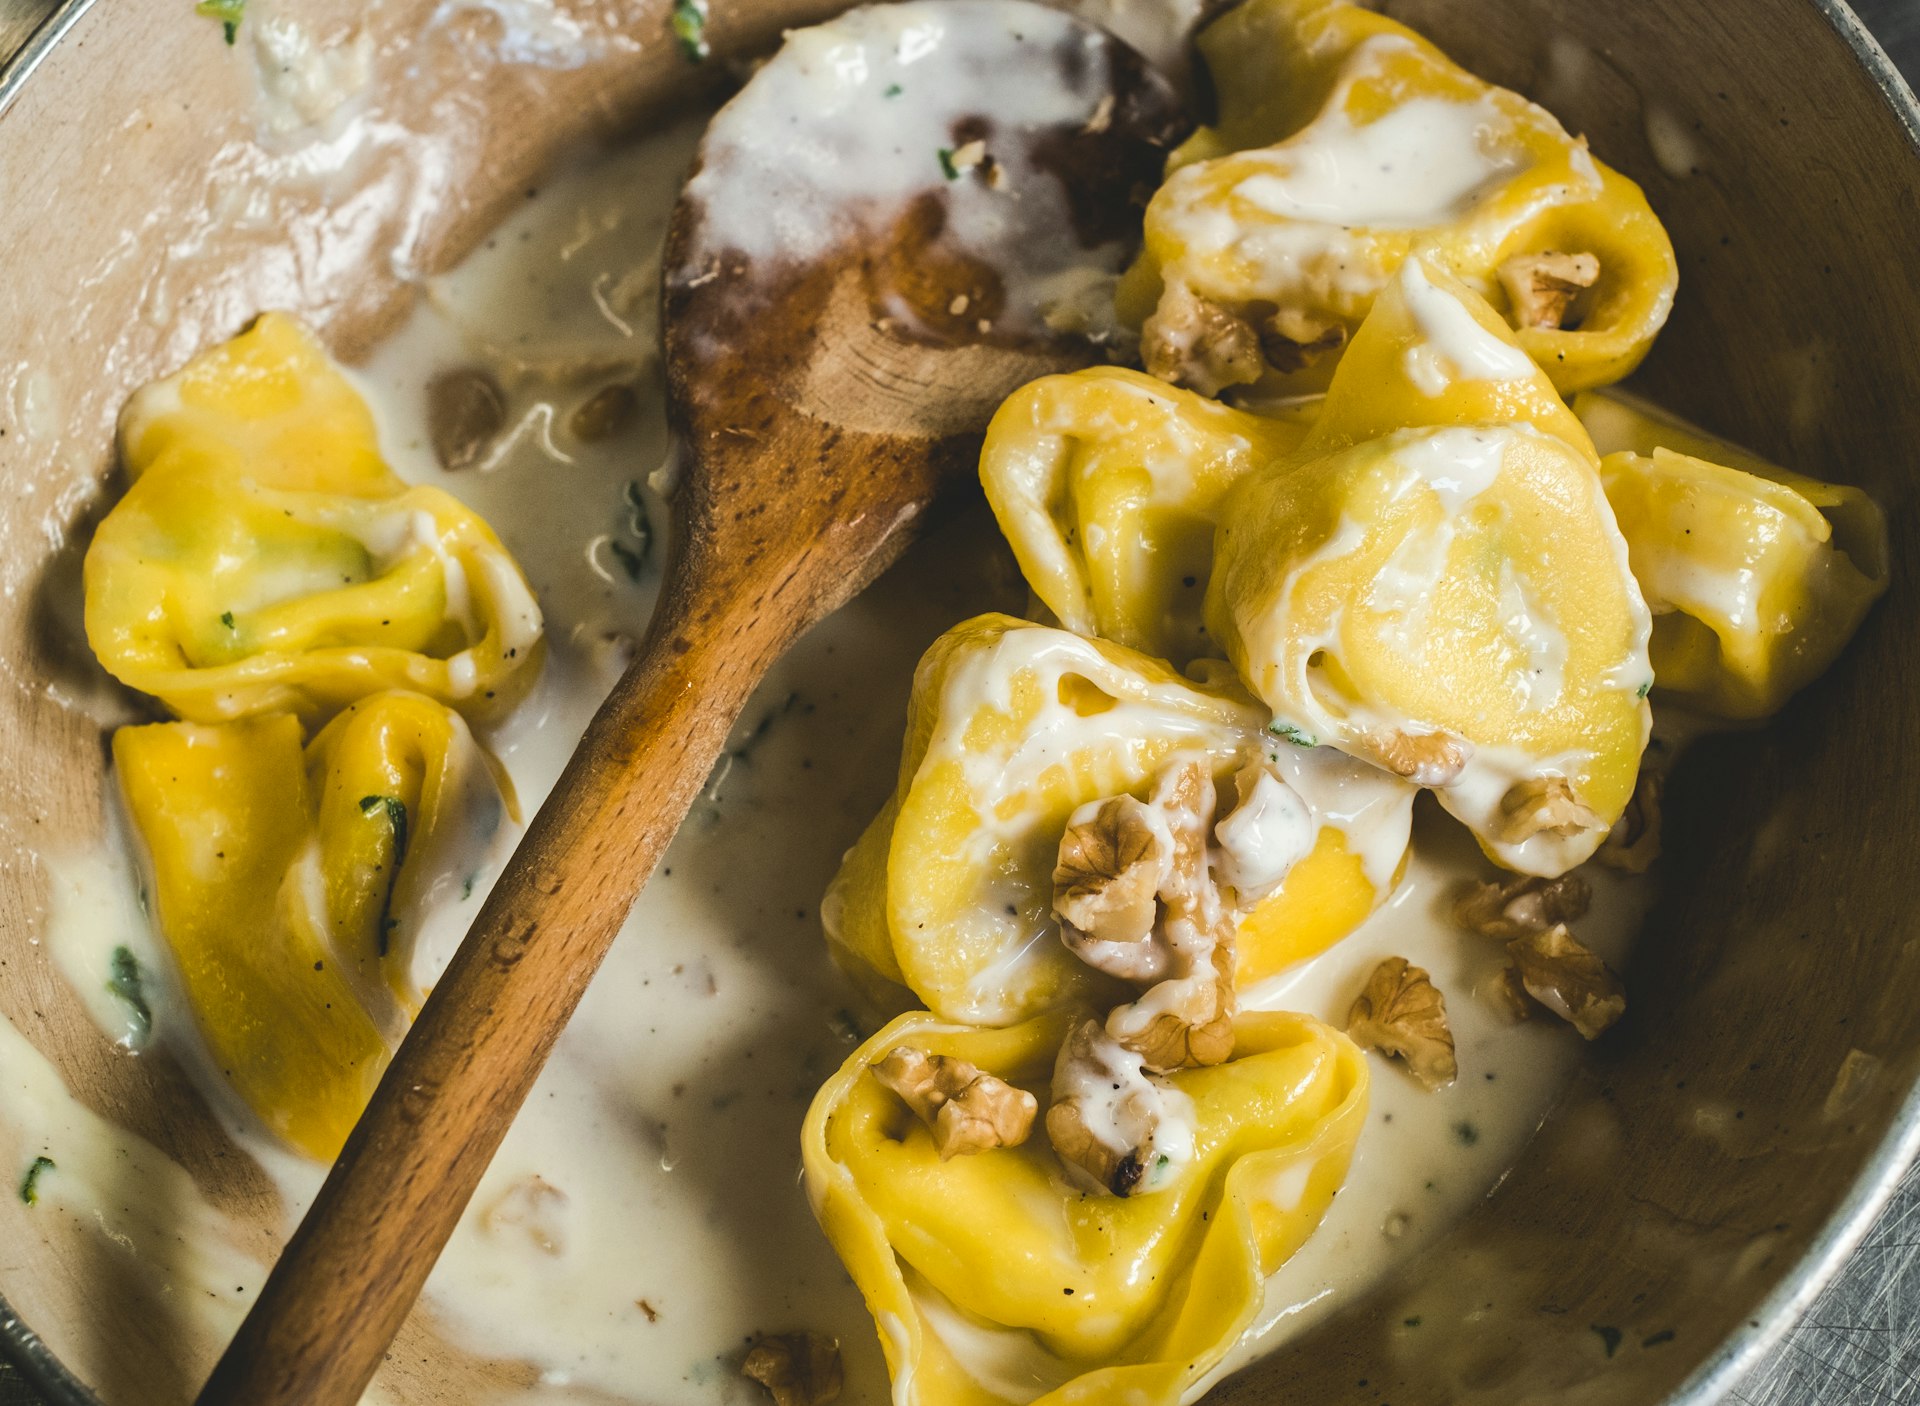 Tortelloni (typical Bologna homemade stuffed pasta) with nuts, cream and sage in their cooking pan